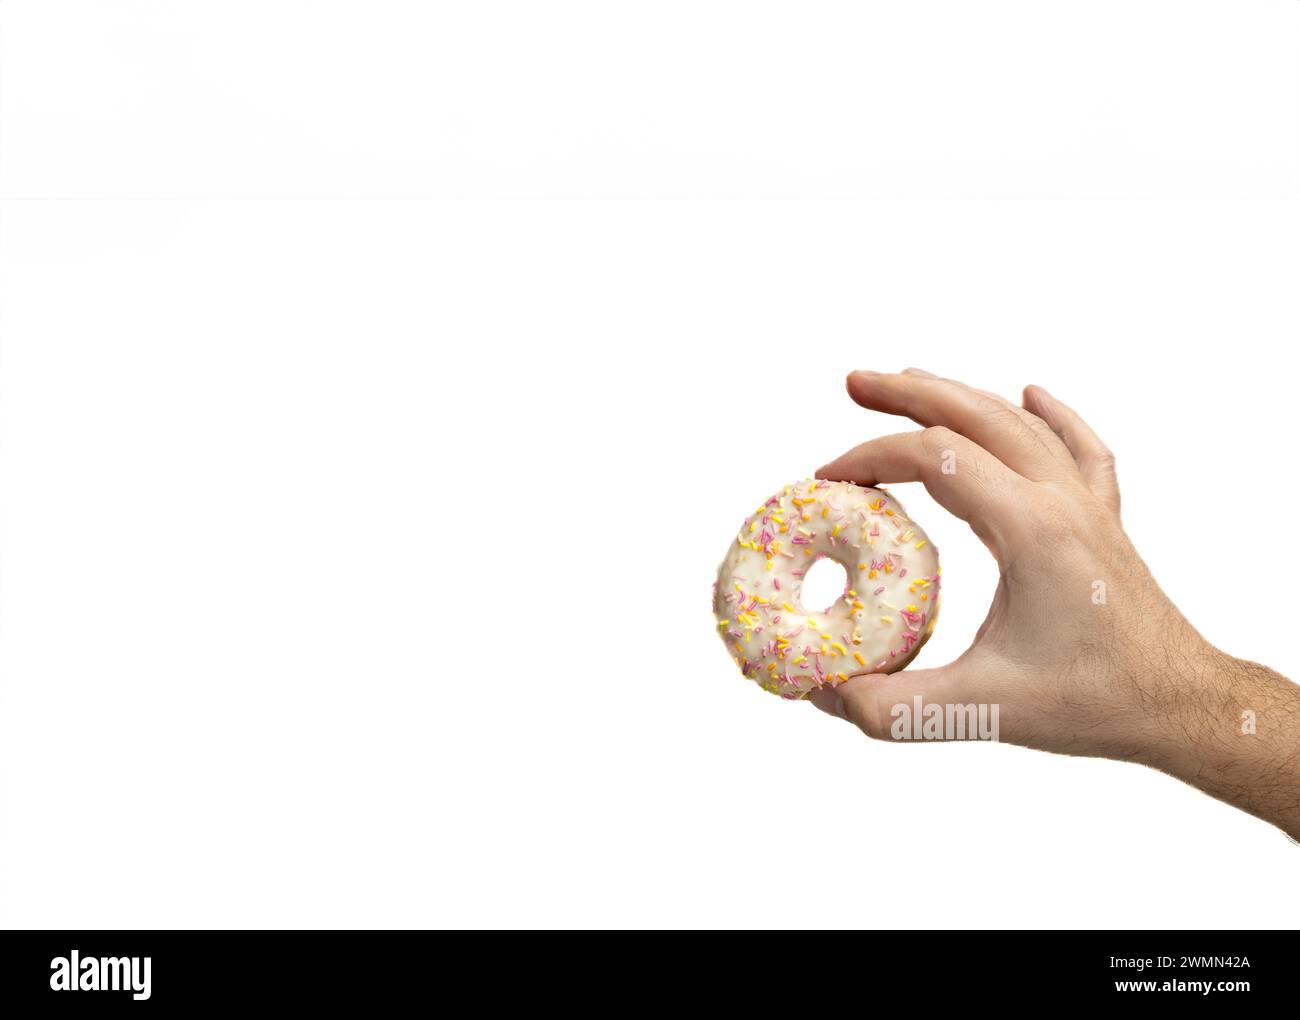 Round donut with frosting and colored sprinkles held between Caucasian man's fingers. Isolated on white. Stock Photo